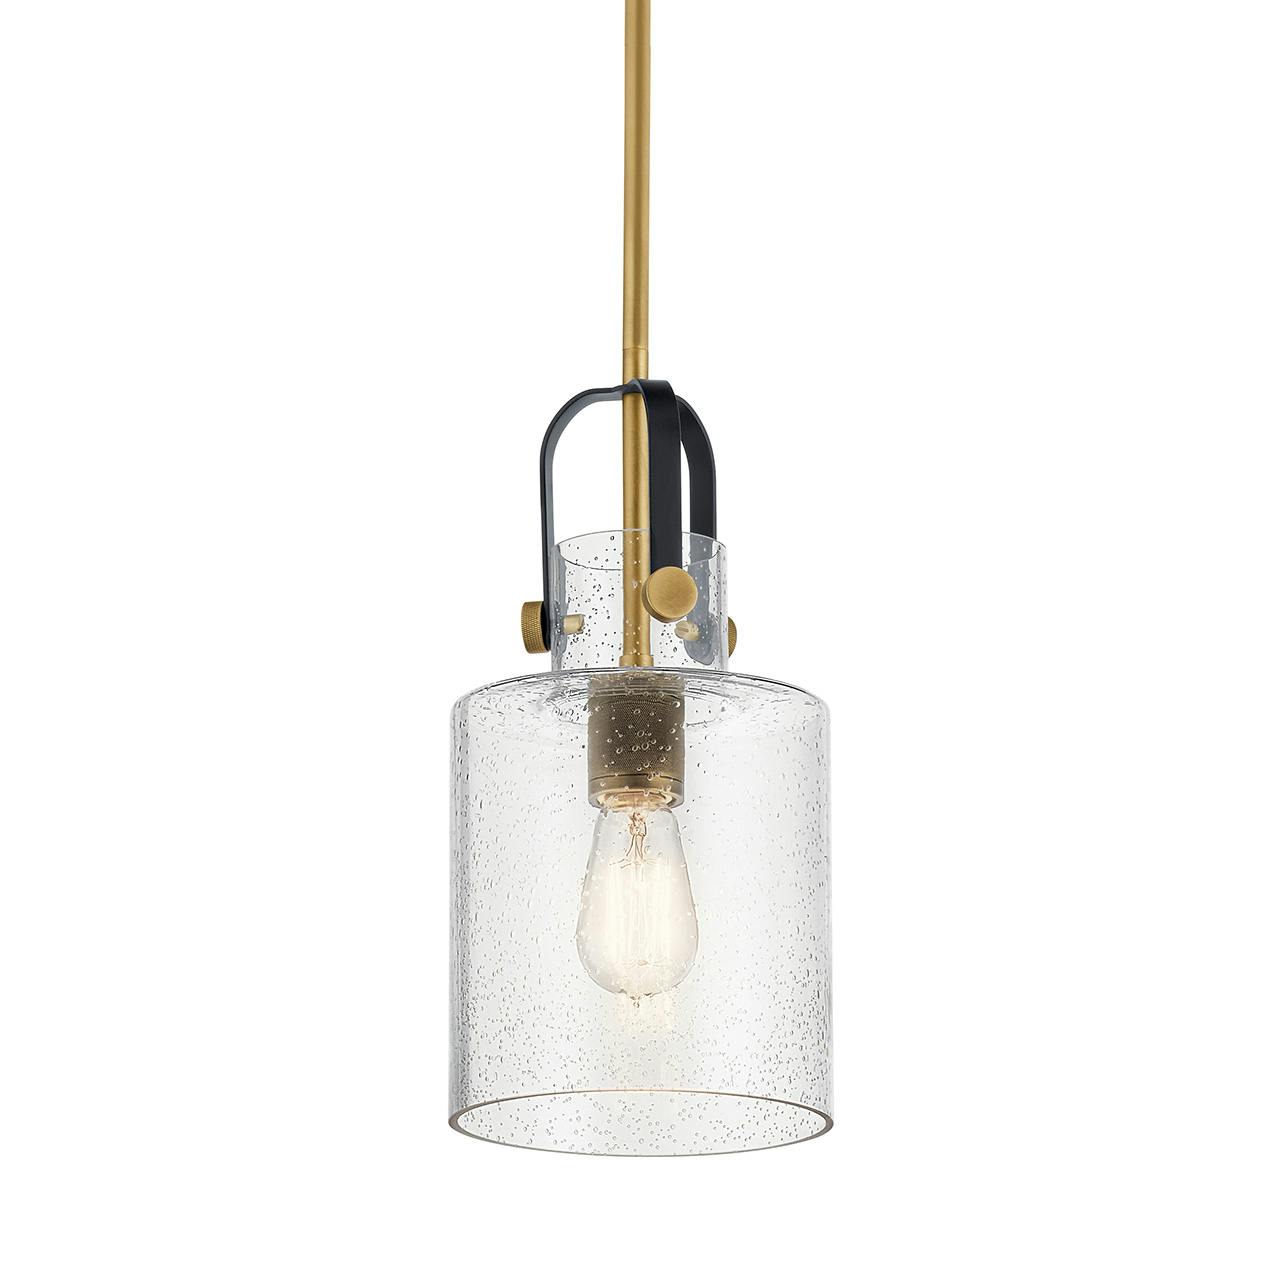 Kitner 1 Light Pendant Black and Brass without the canopy on a white background